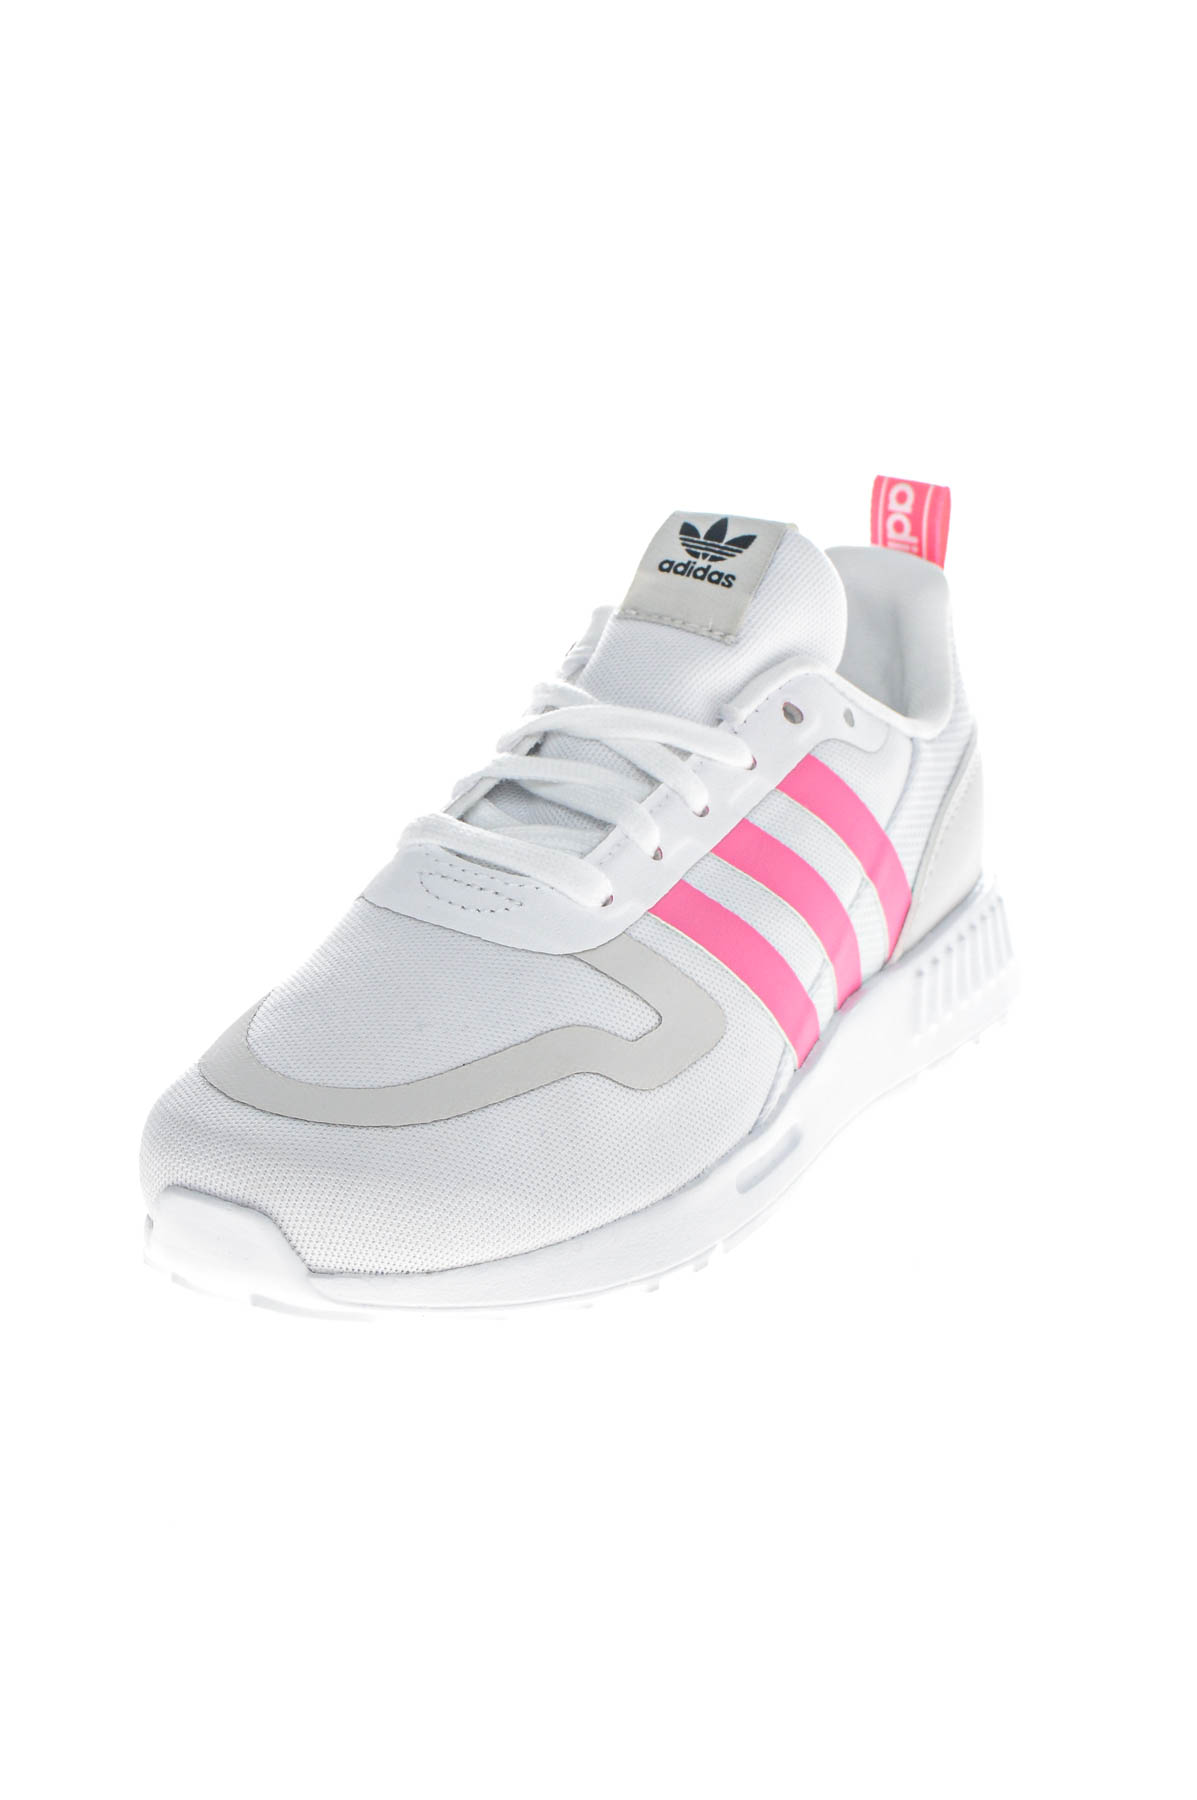 Girl's shoes - Adidas - 1